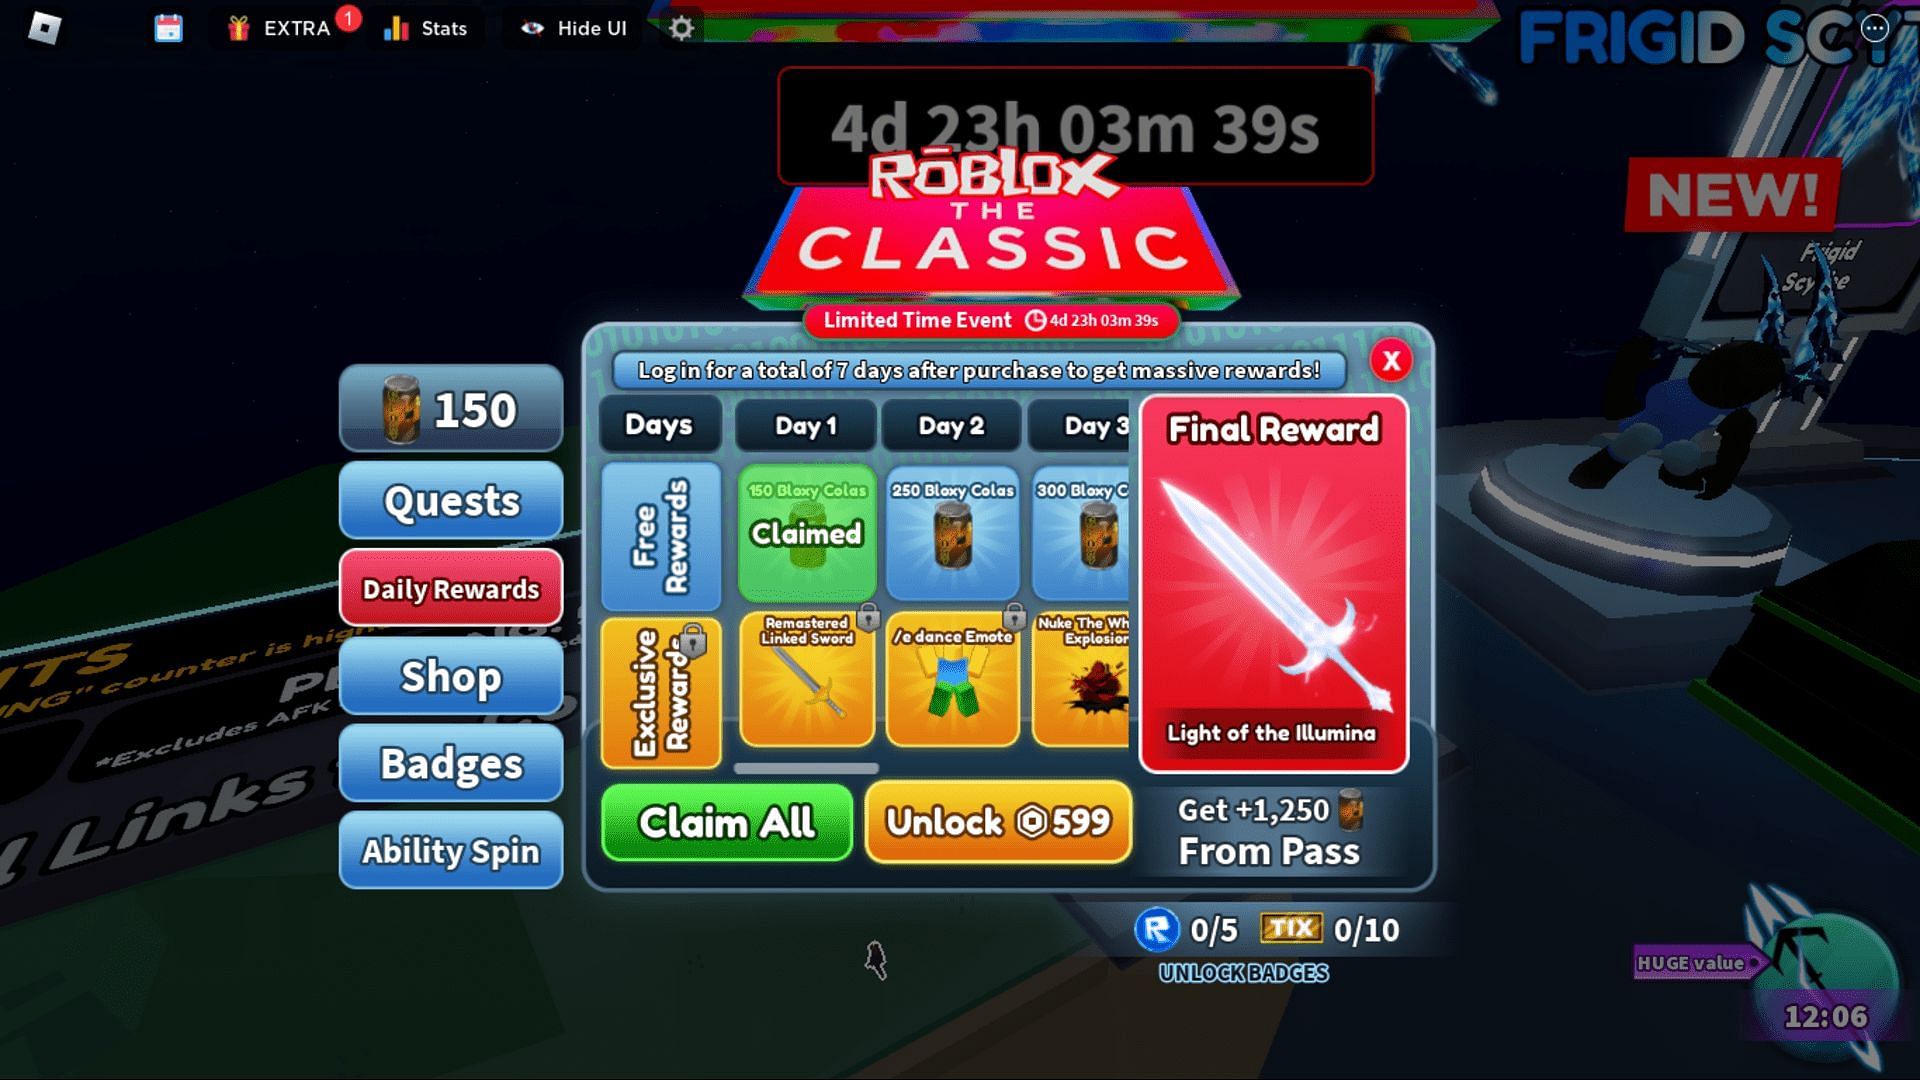 Screenshot of the free and exclusive daily rewards in Blade Ball The Classic event (Image via Roblox)